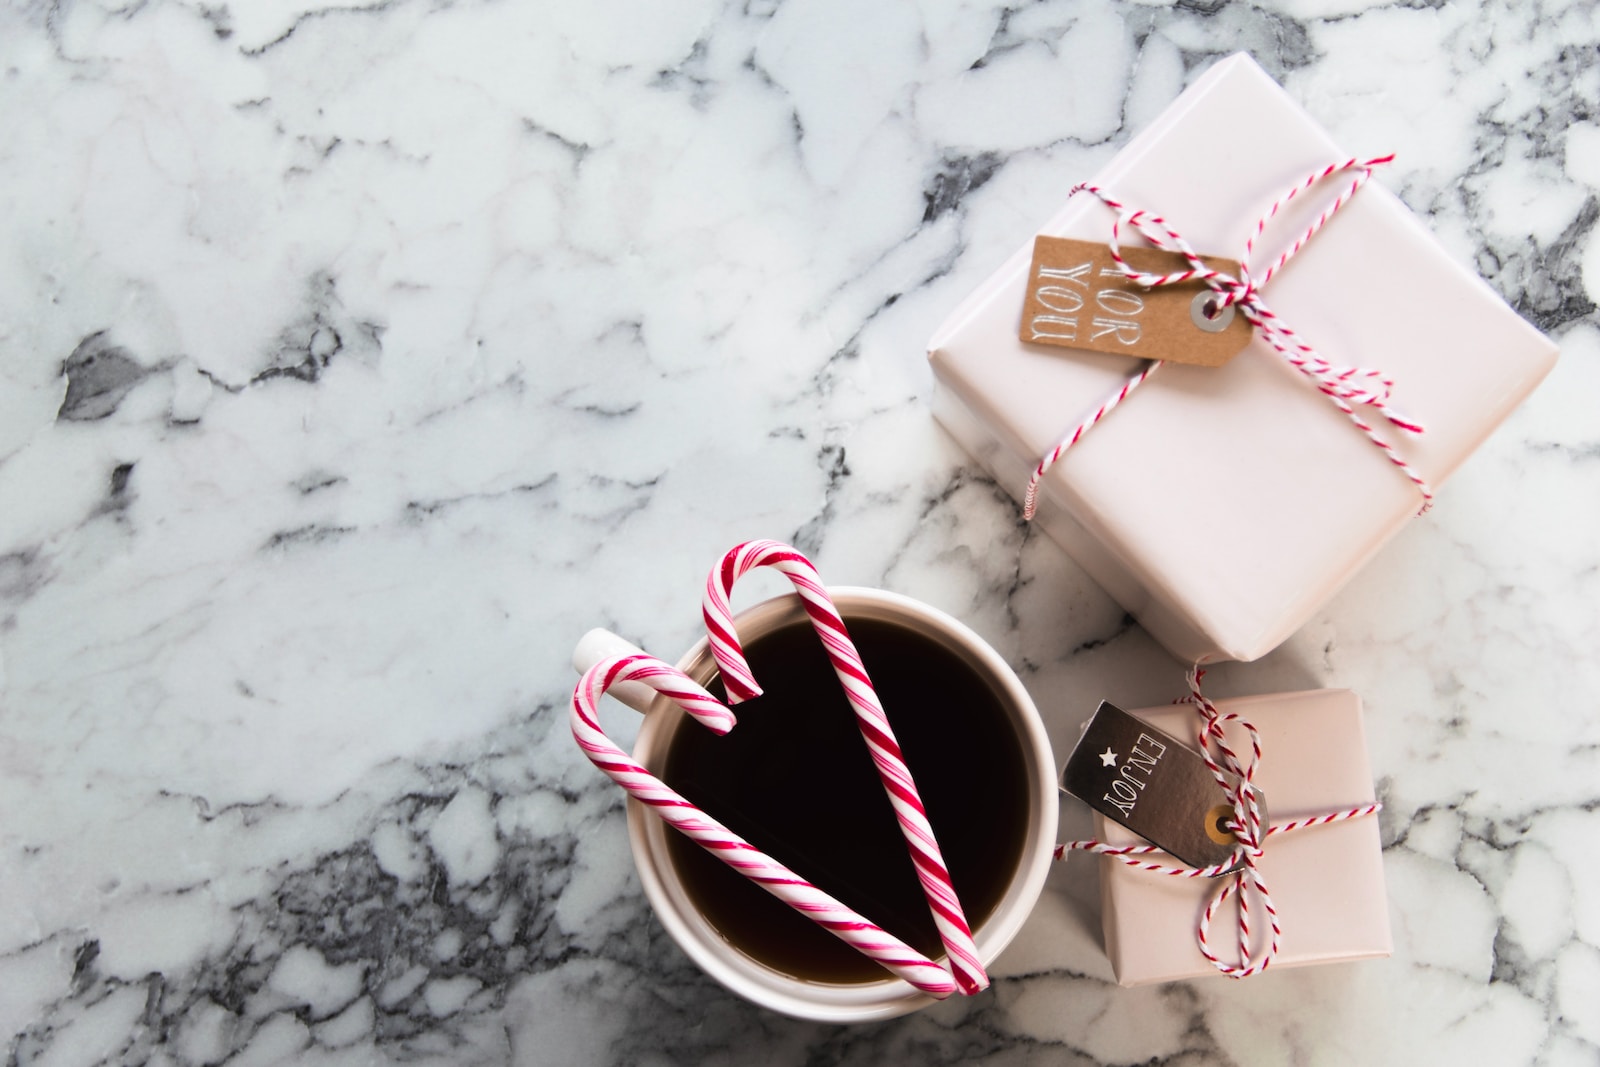 The Best Gift Ideas For Women: Impress Her With These Surprises